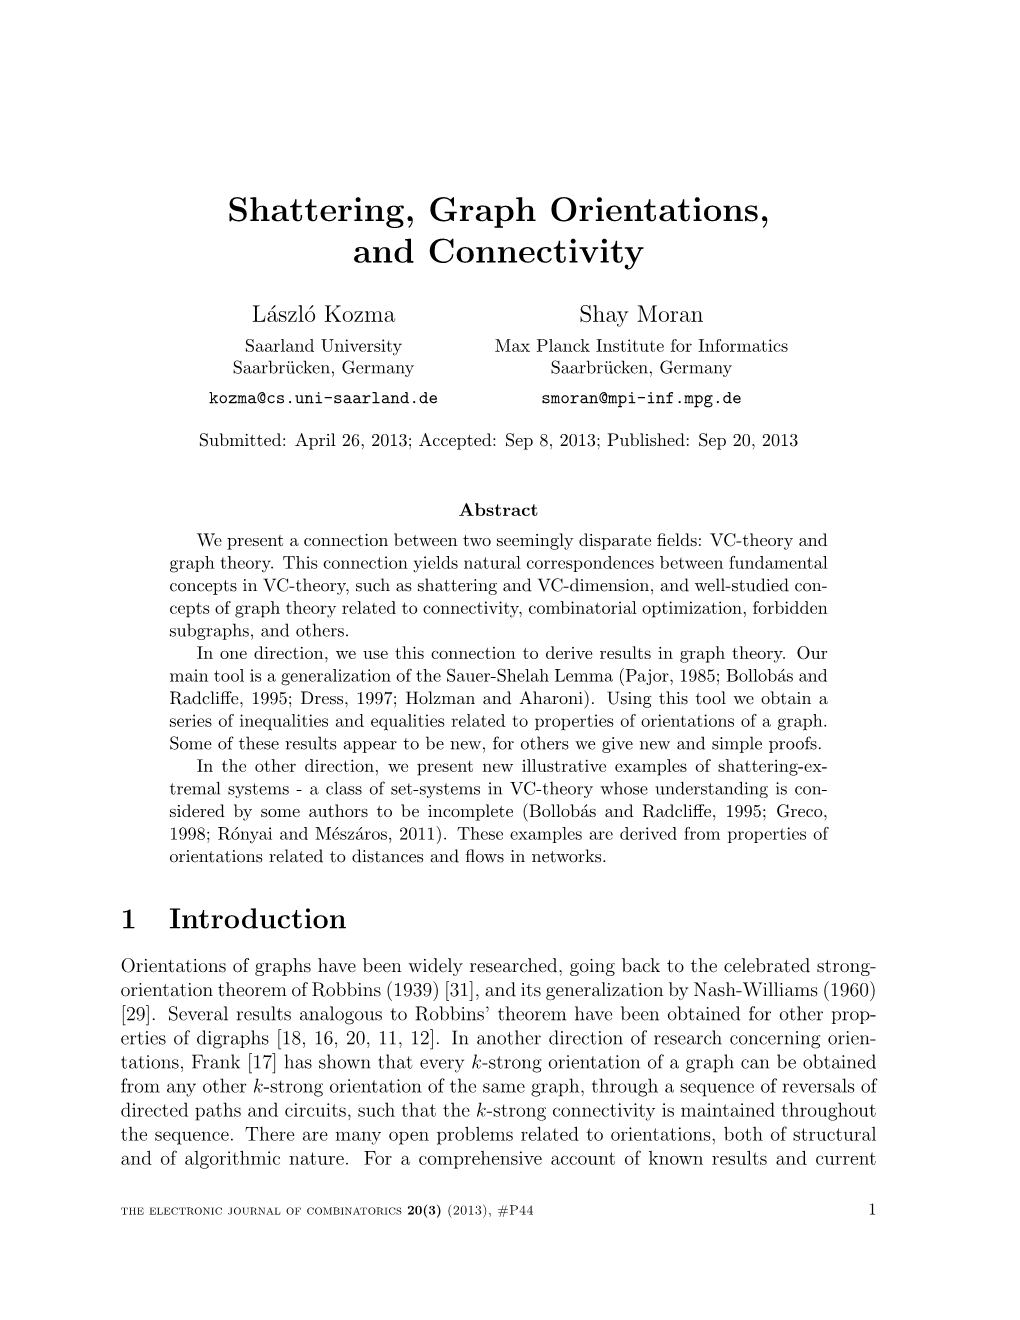 Shattering, Graph Orientations, and Connectivity